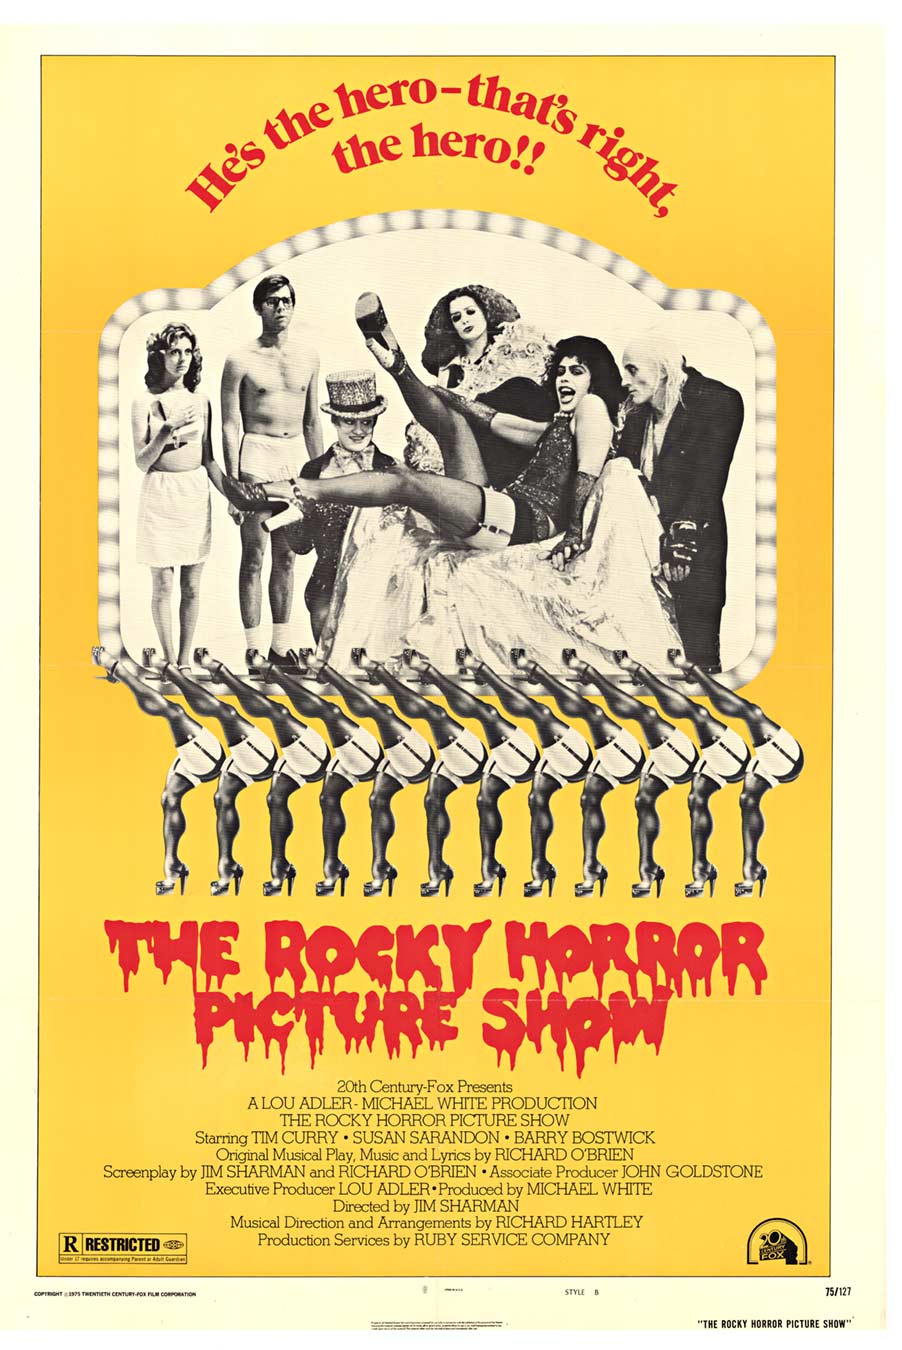 Rocky Horror Picture Show movie poster. Watch out this one will rock your world